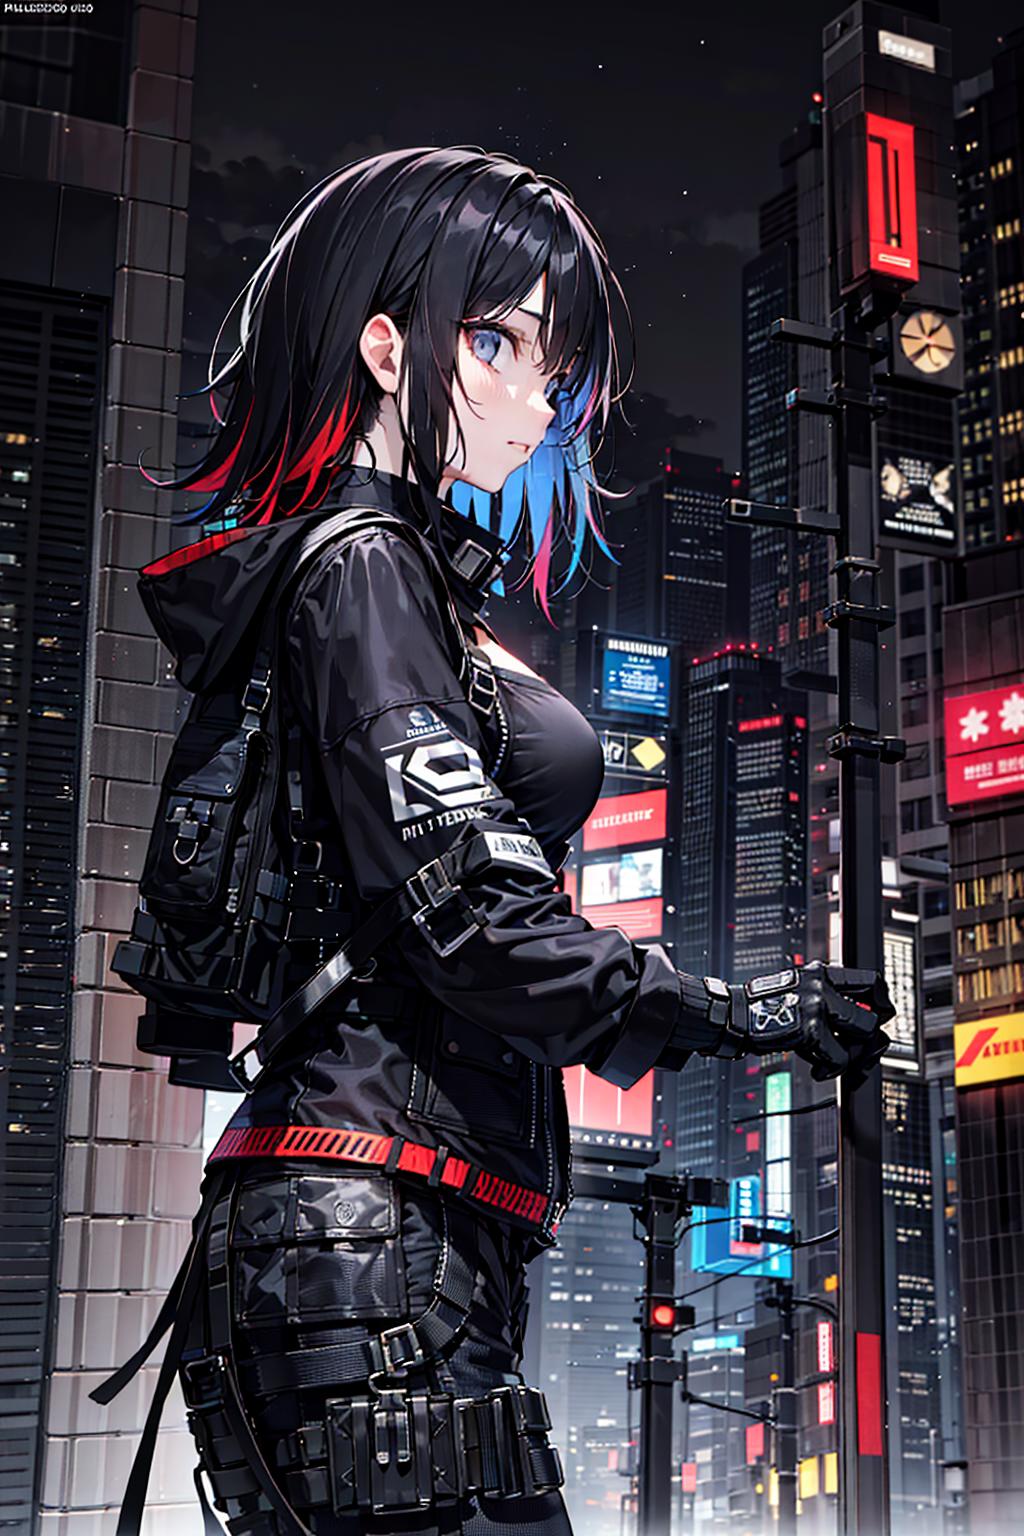 A woman with black hair, blue eyes, and a black jacket stands in the city at night.